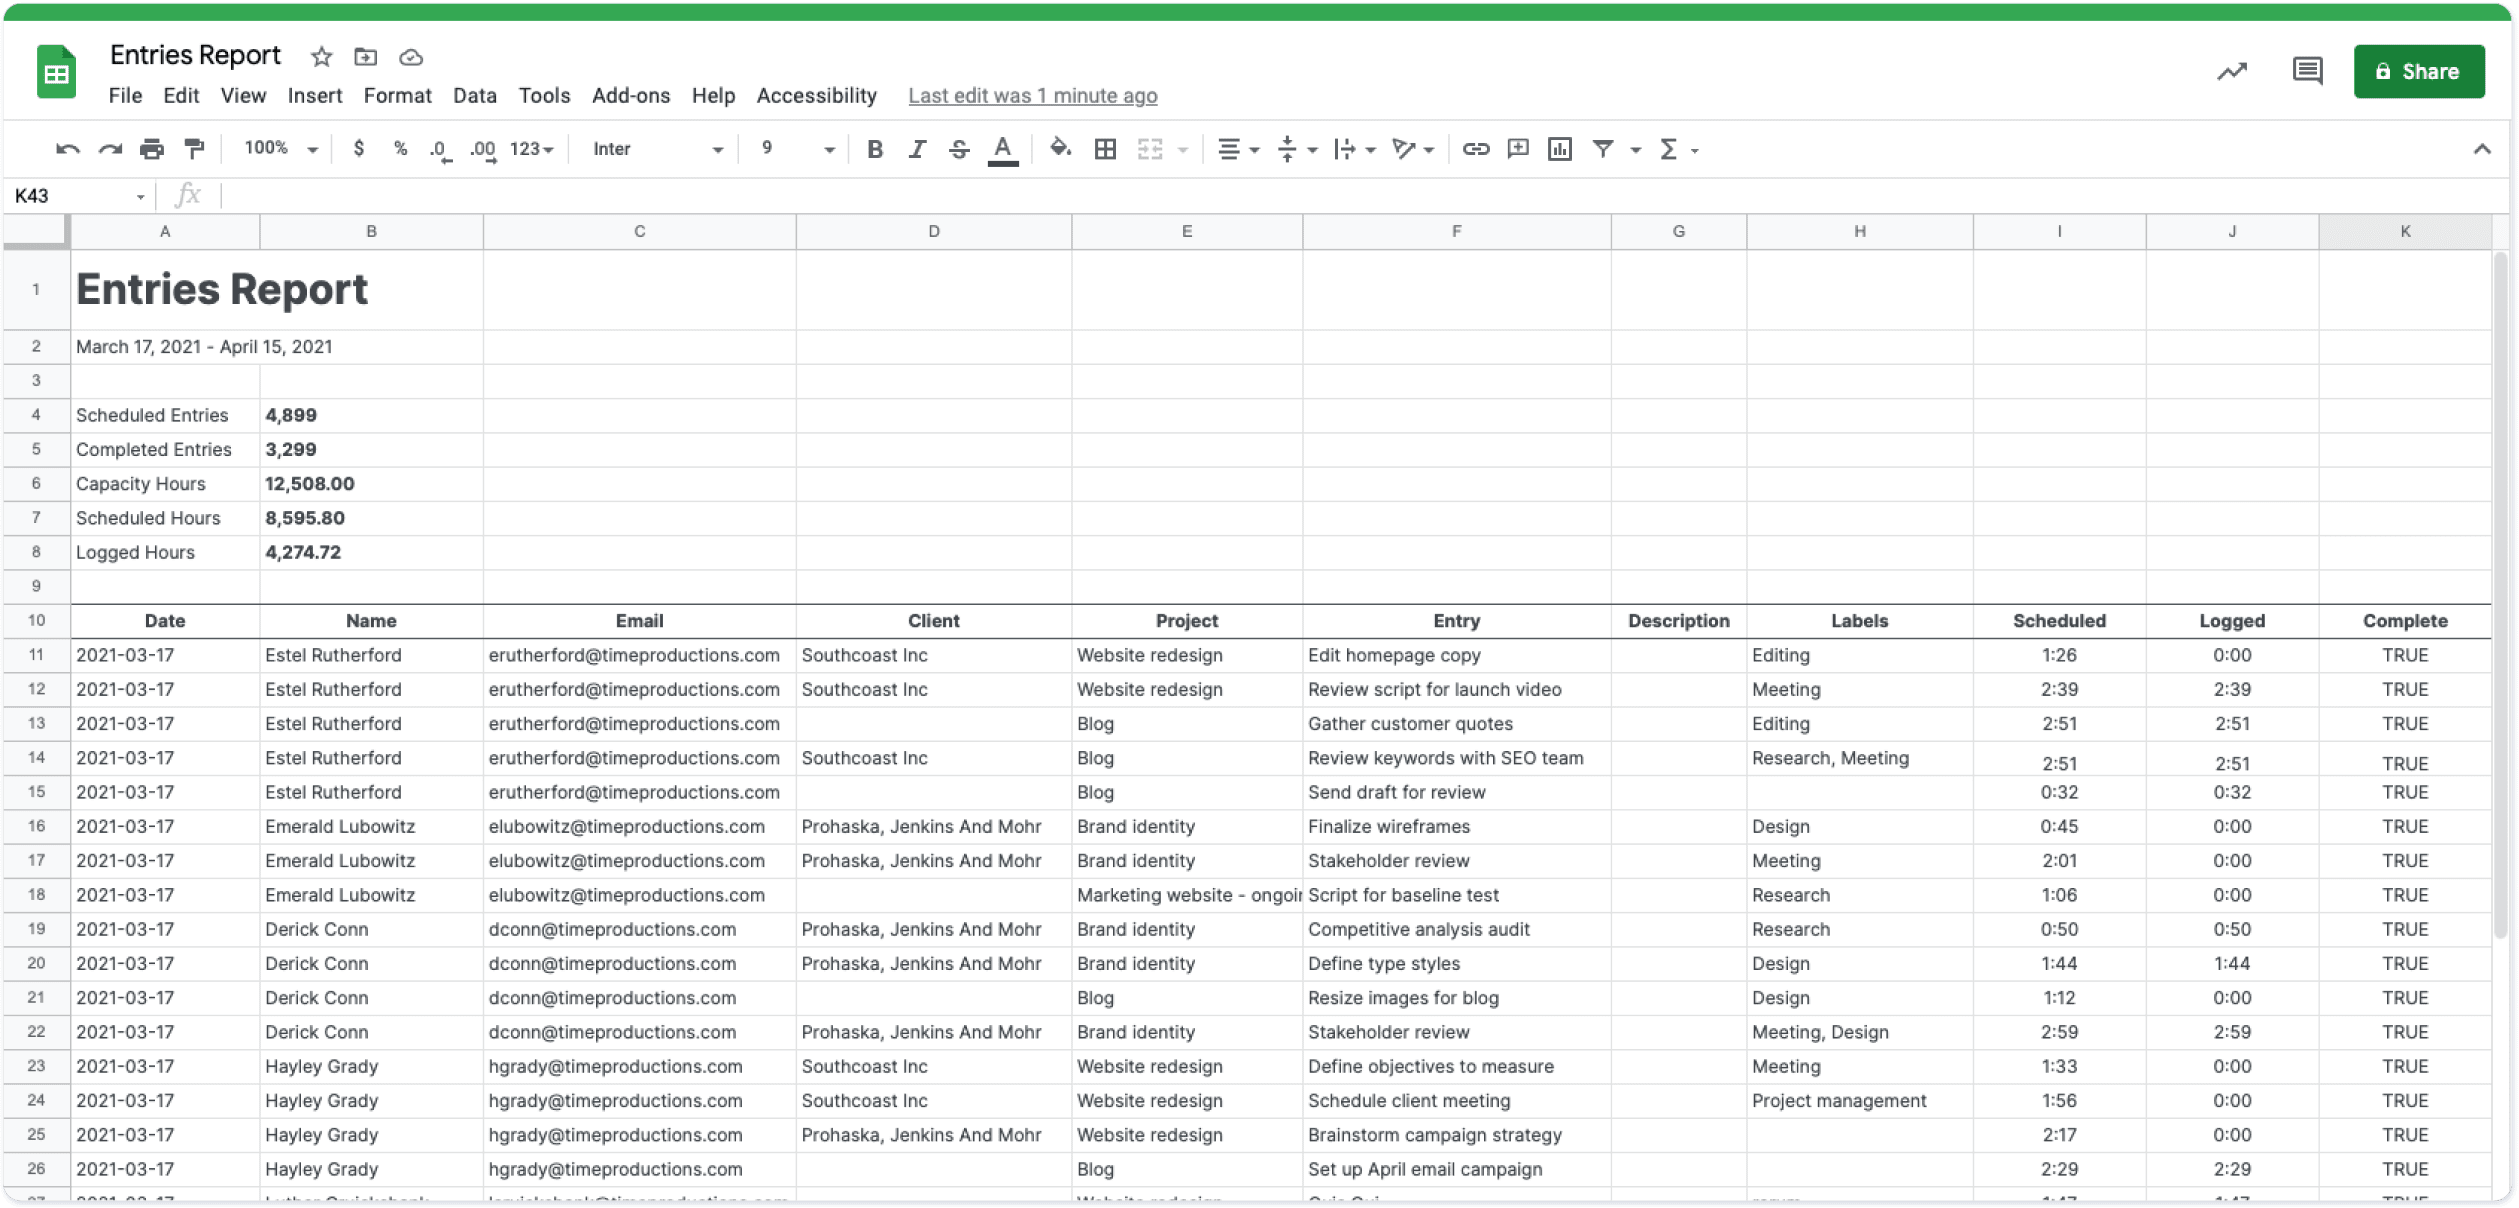 Tracking the Winter Games on Google Sheets - Erintegration